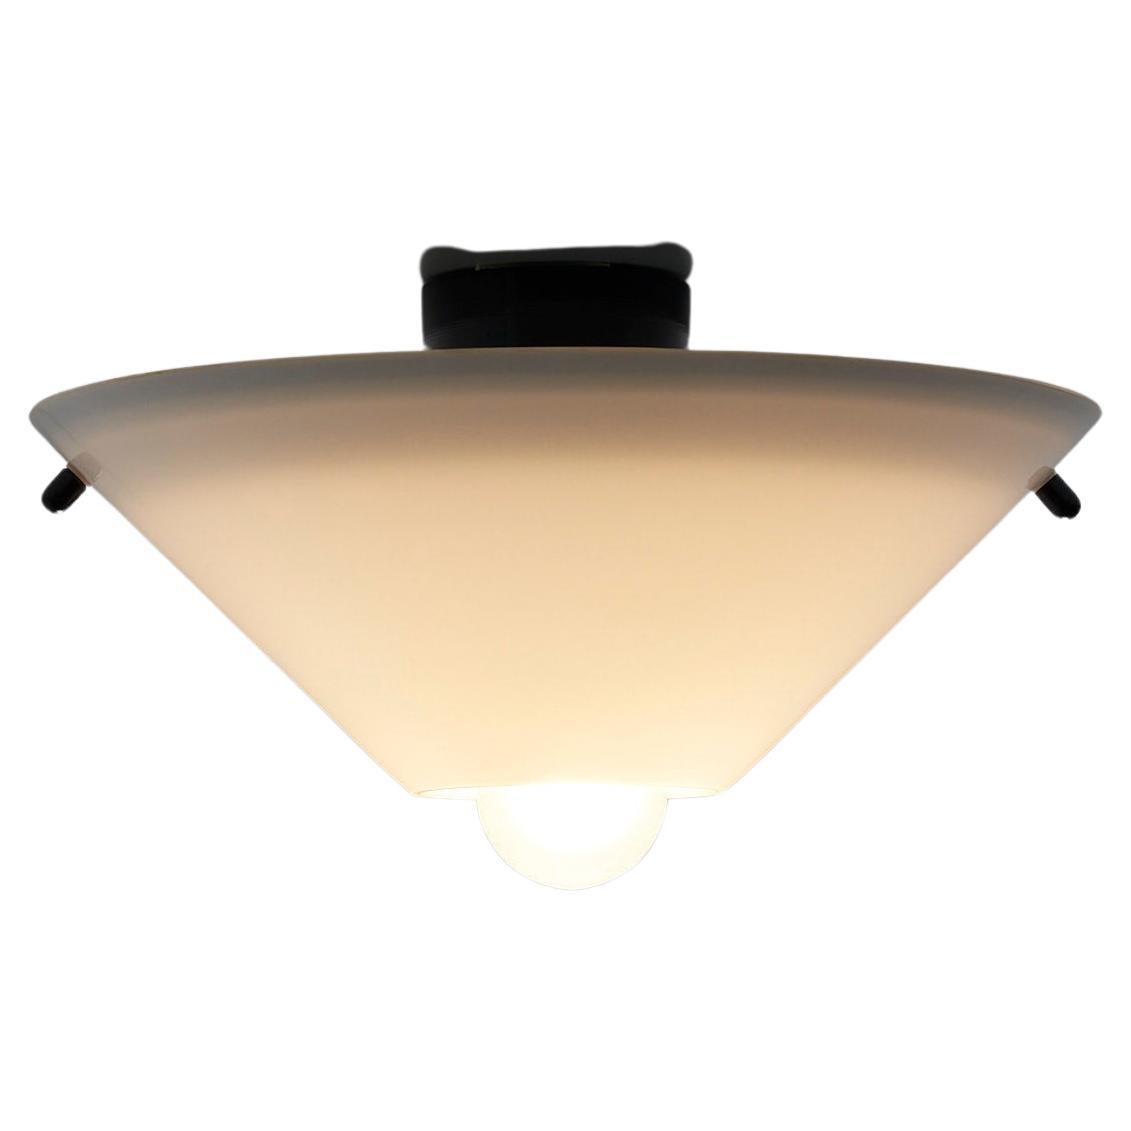 'Cono' Space Wall or Ceiling Mount, Italy Lamperti For Sale